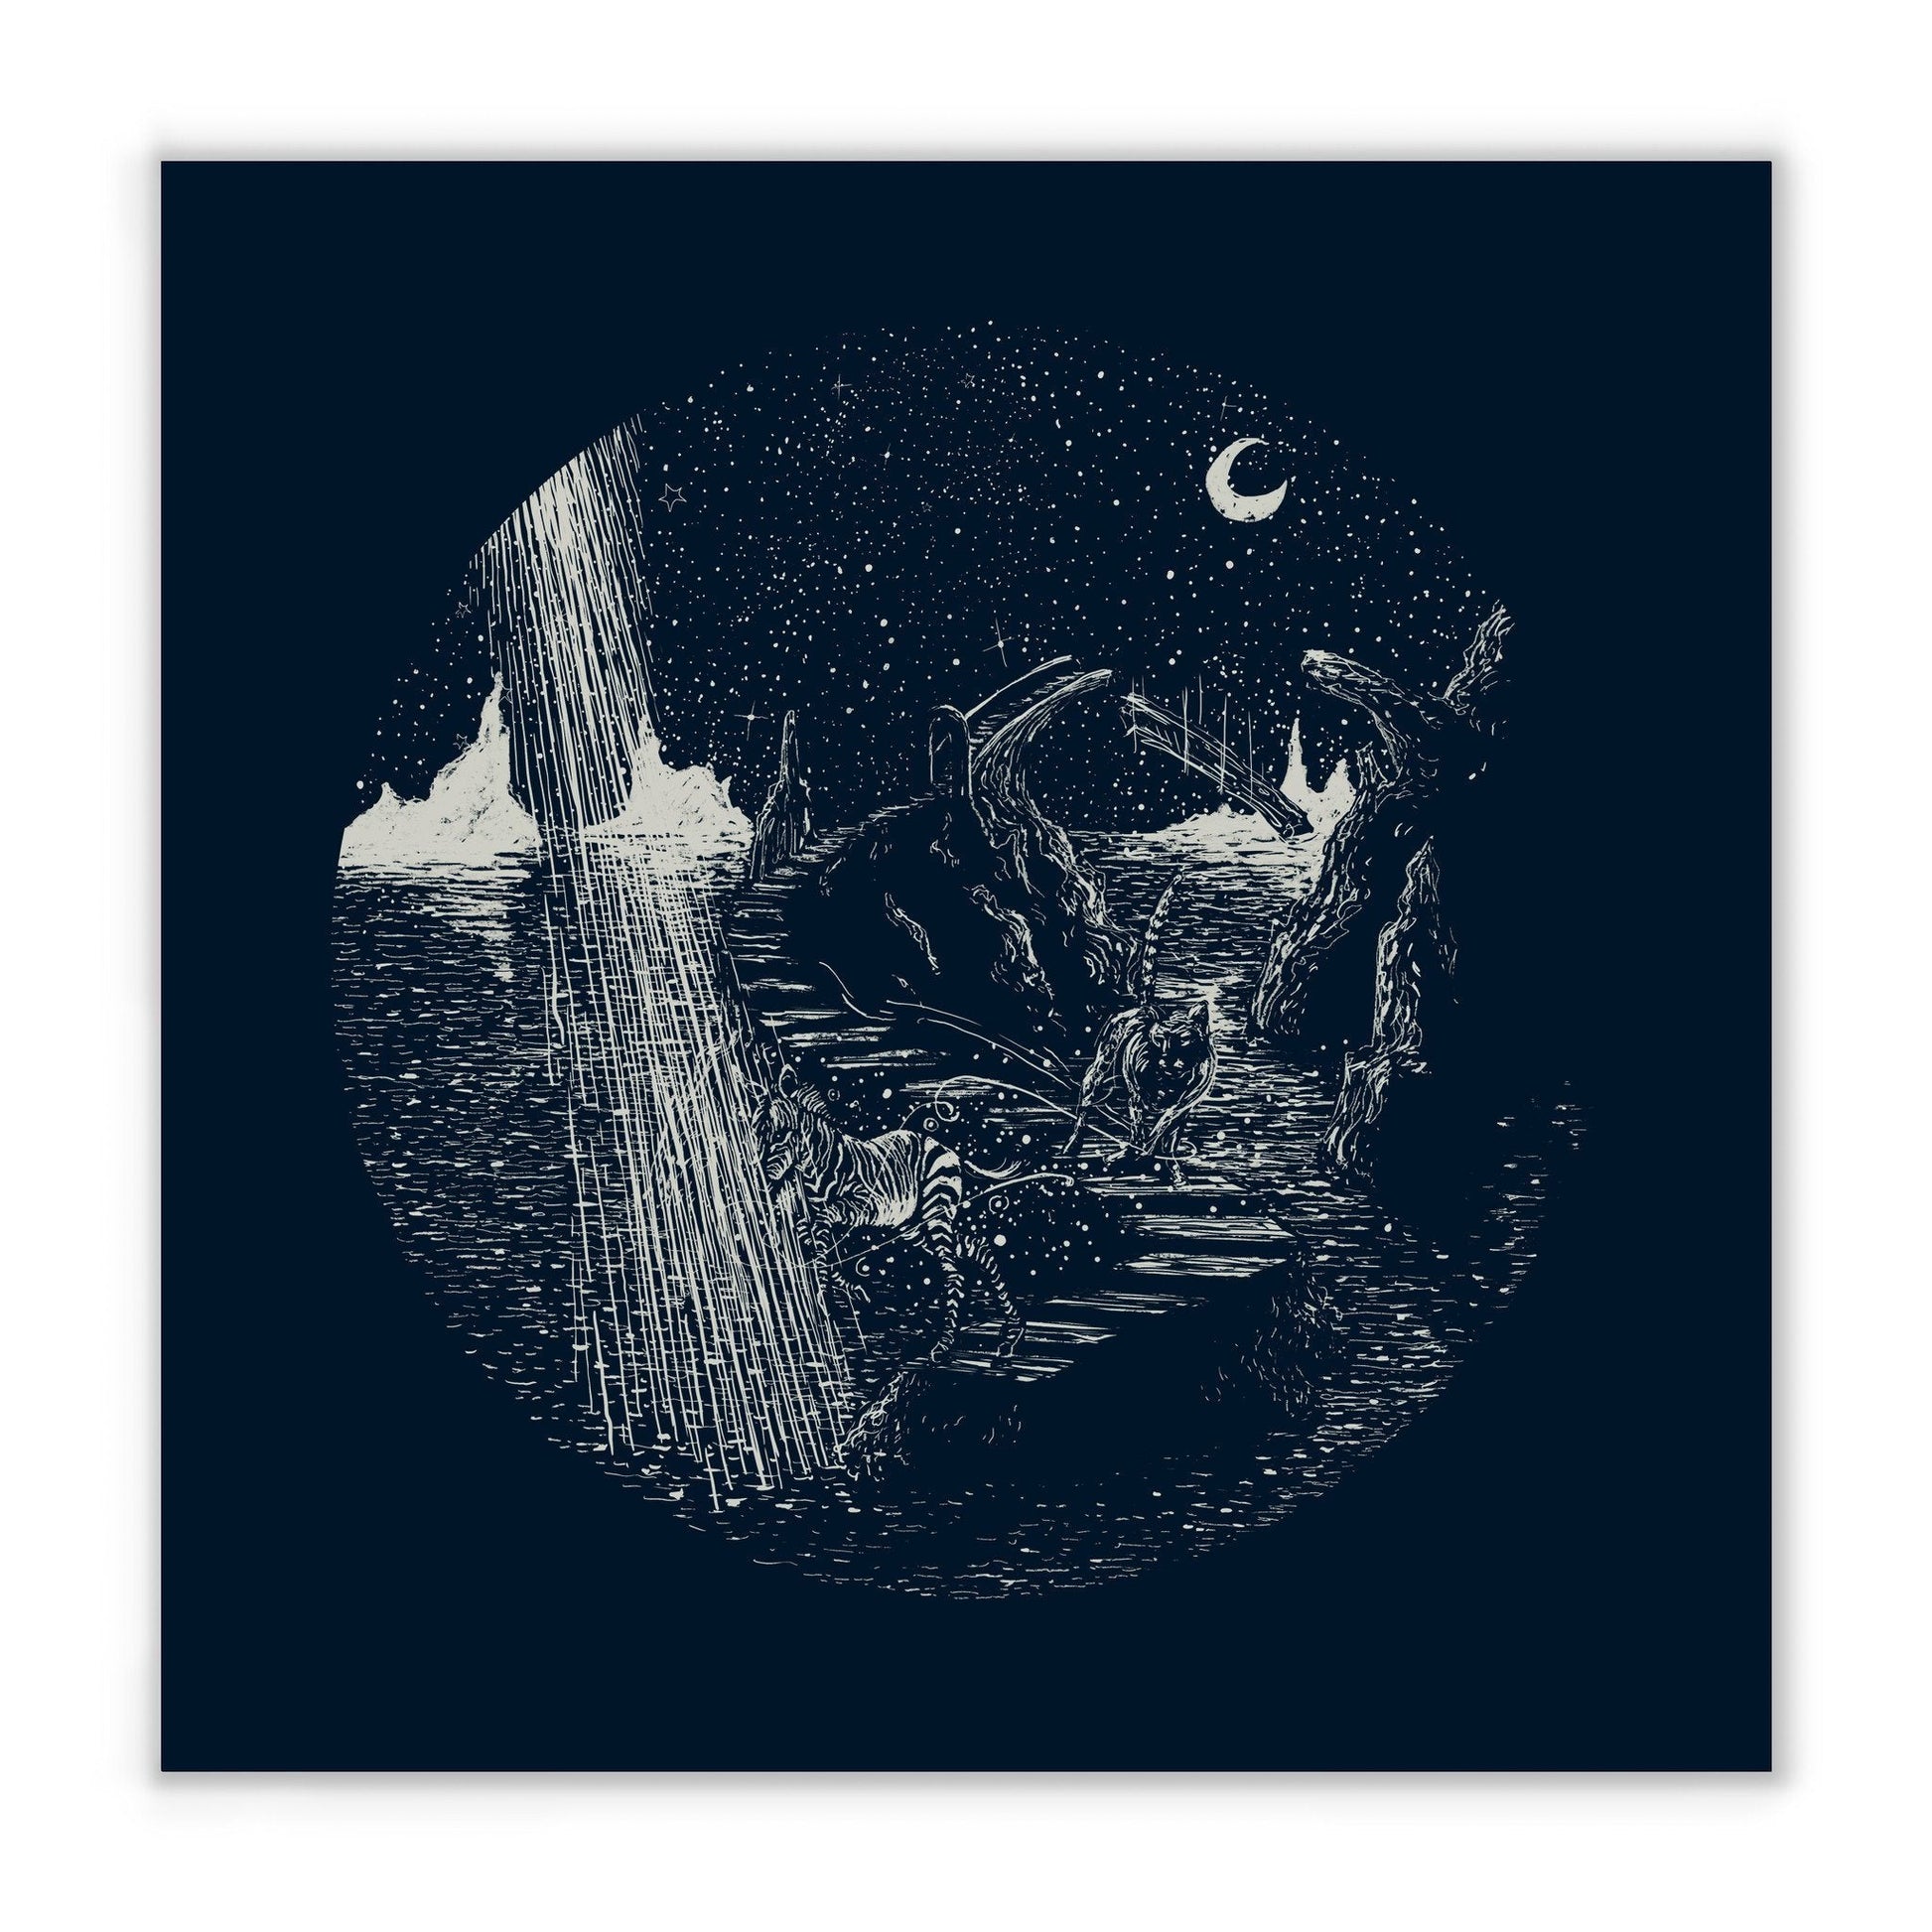 The Sacrifice (Limited Edition of 50) Print James R. Eads